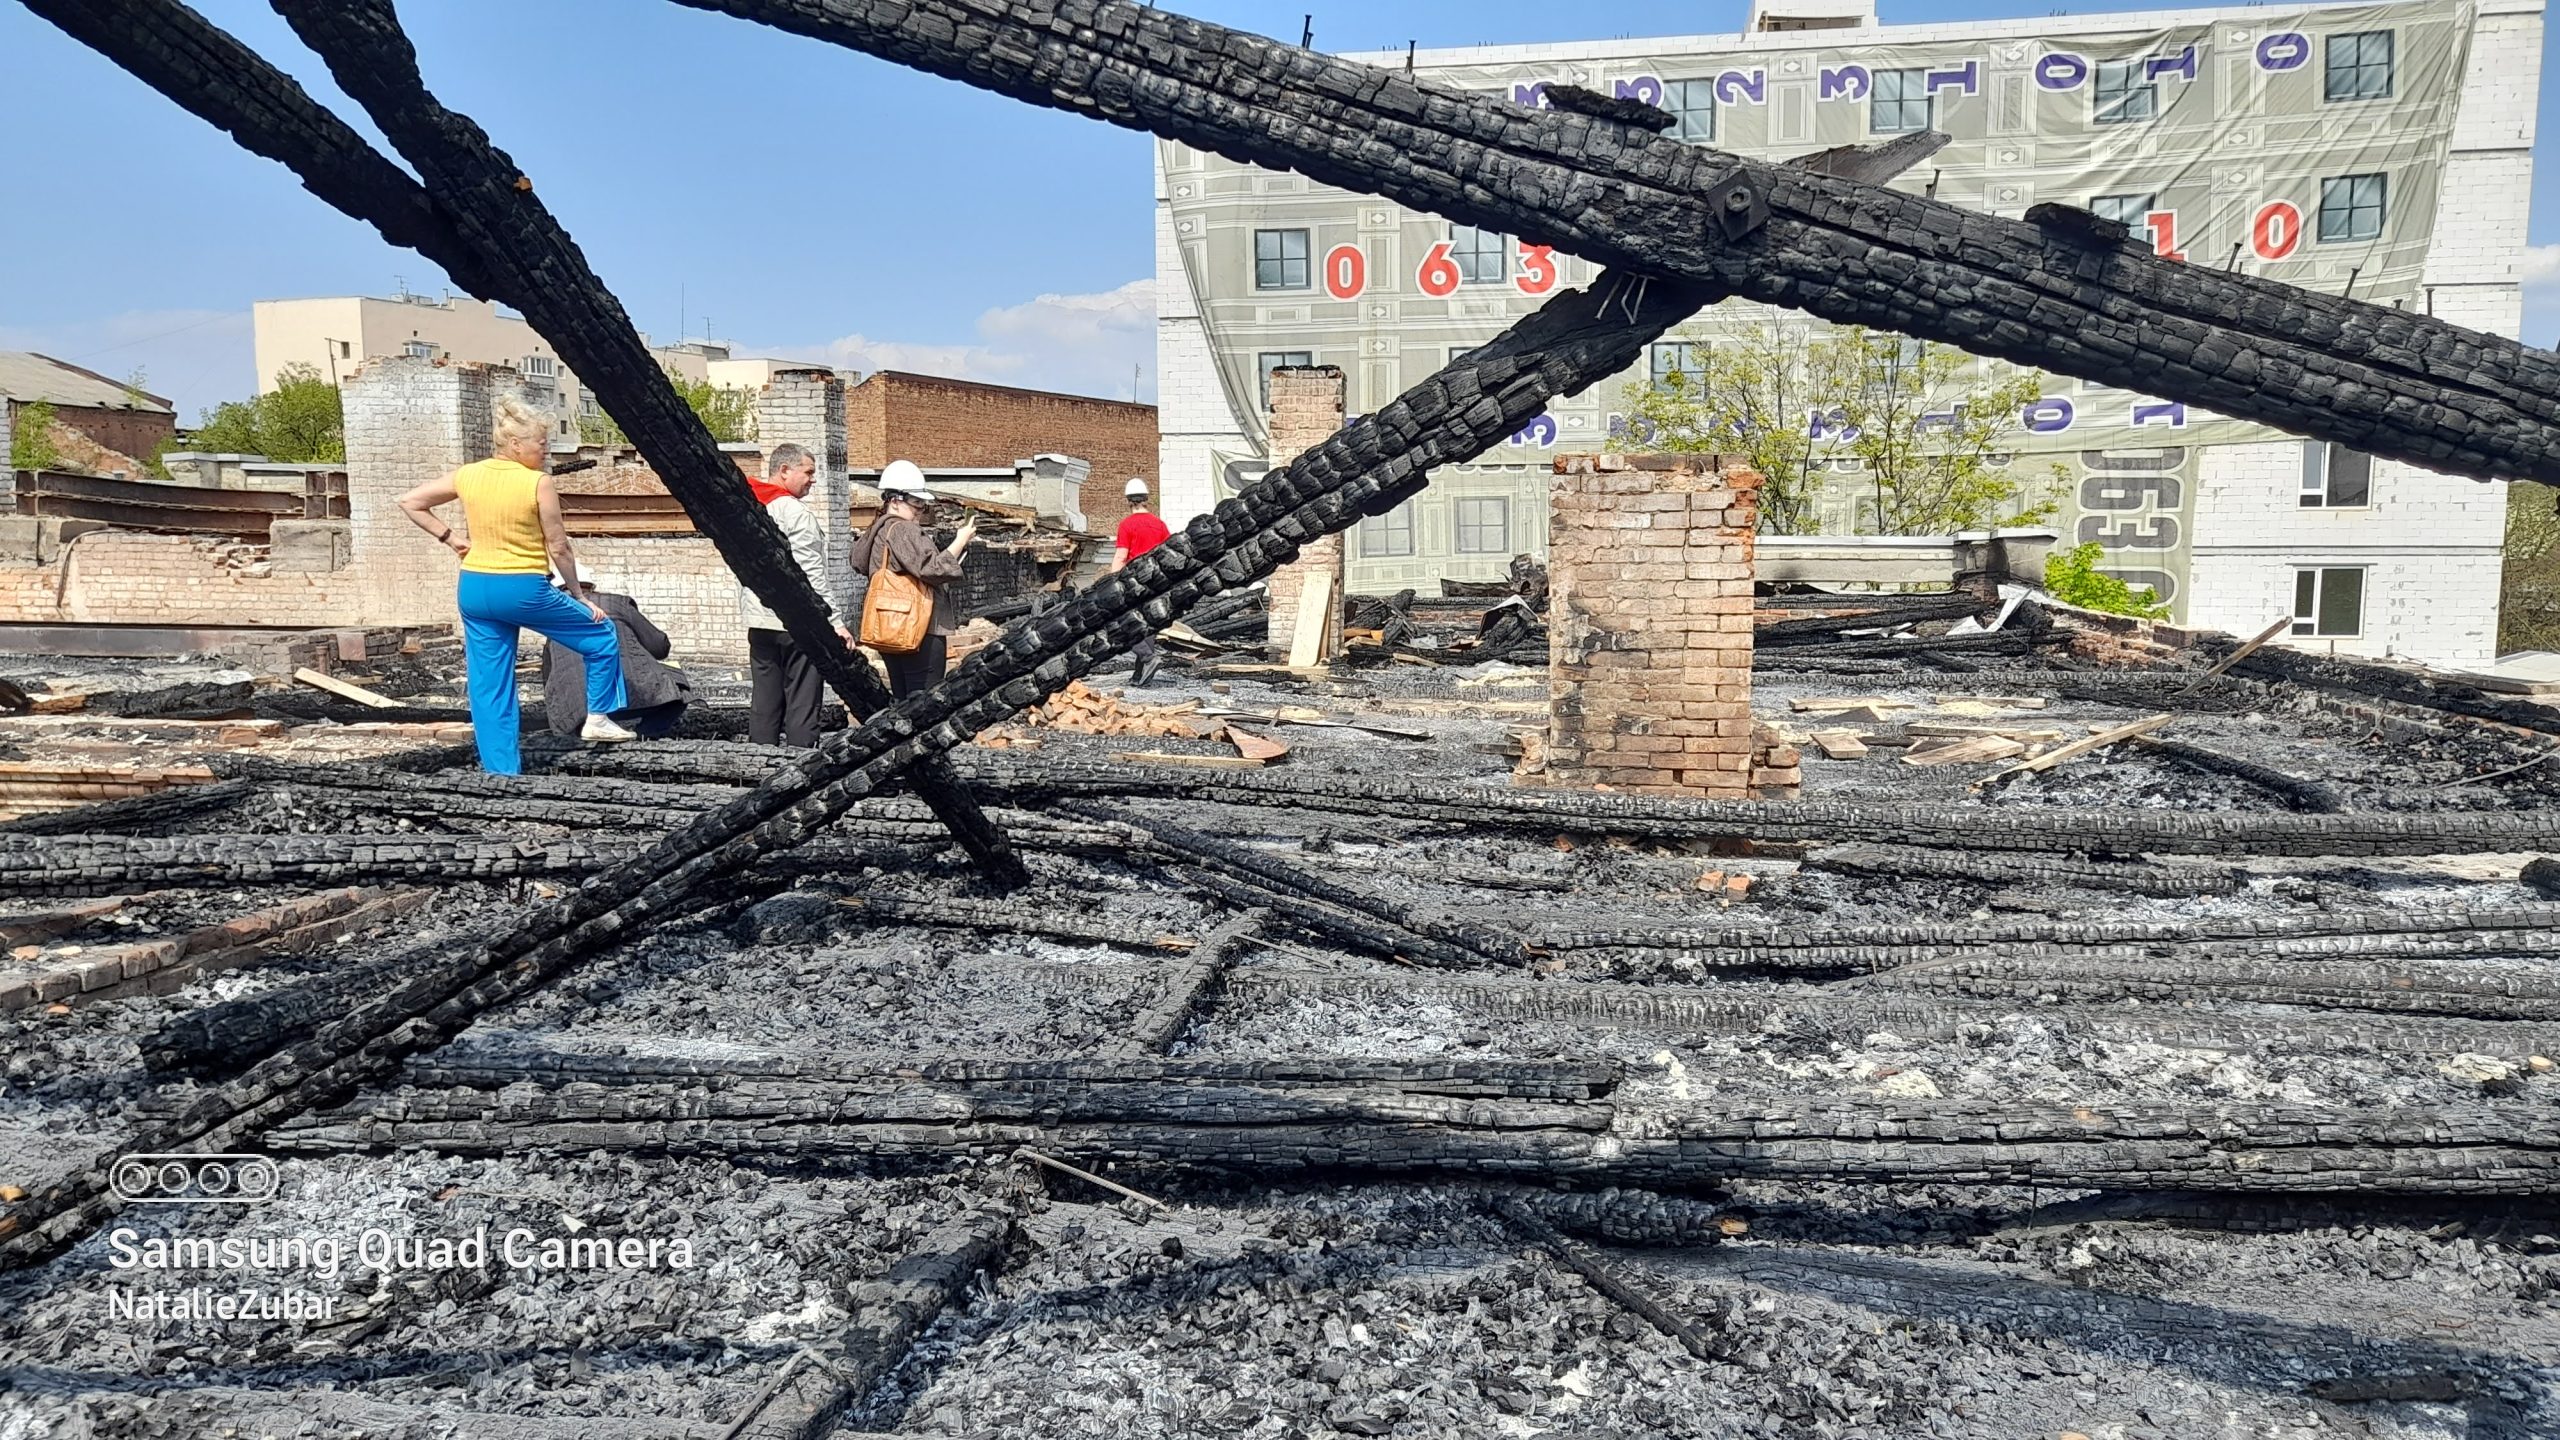 The roof of a XIX century historical mansion in Kharkiv, a functioning hospital, burnt by the Russian rocket. Architects assess the damage. Photo was taken on May 04, 2022 by Nataliya Zubar.